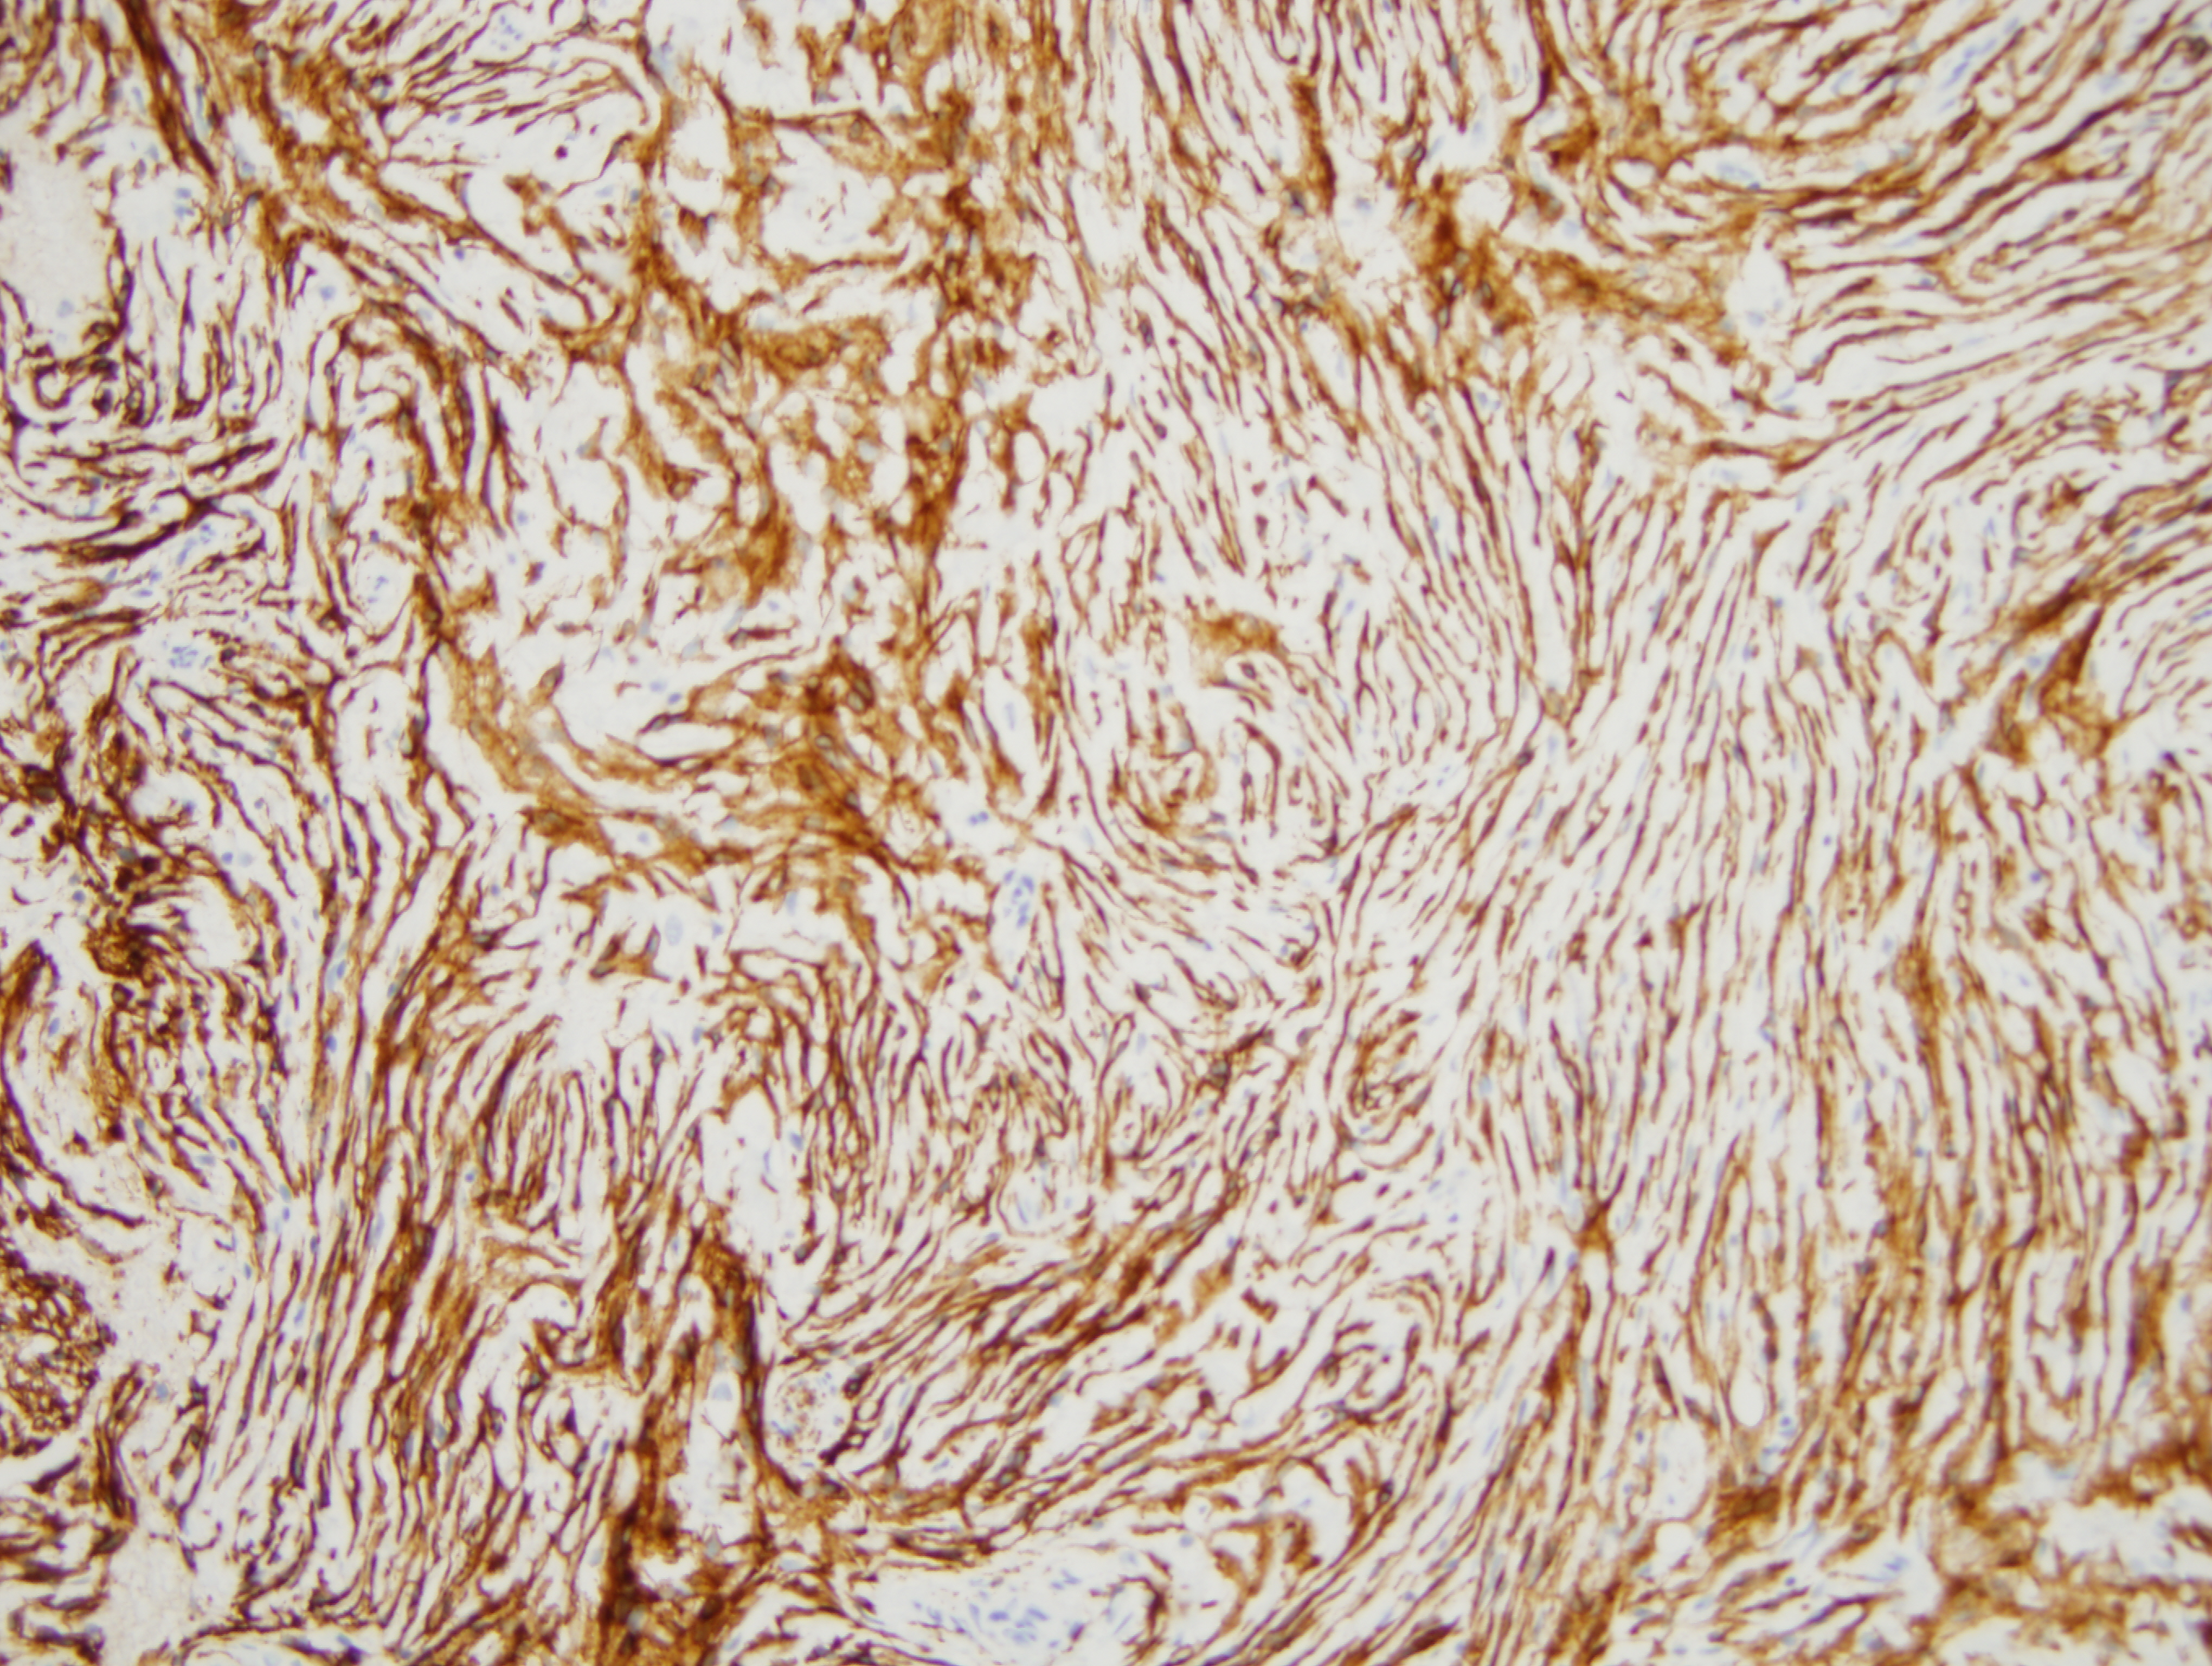 Slide 6: The cells are CD56 positive